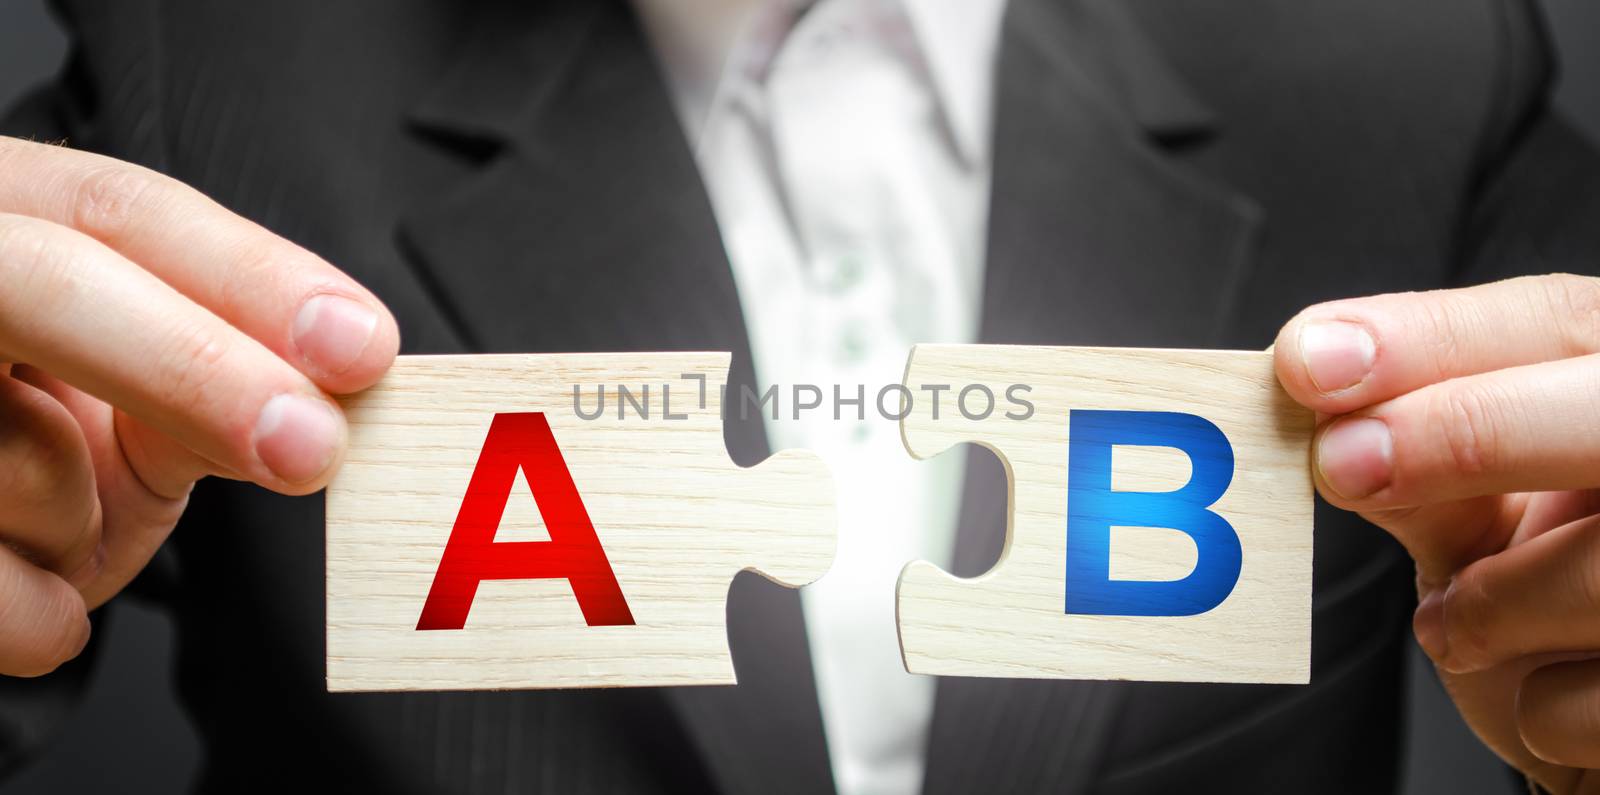 A man connects puzzles with the letters A and B. A/B test marketing research method. multivariate testing. Improving products and services based on statistics and observations. Marketer by iLixe48